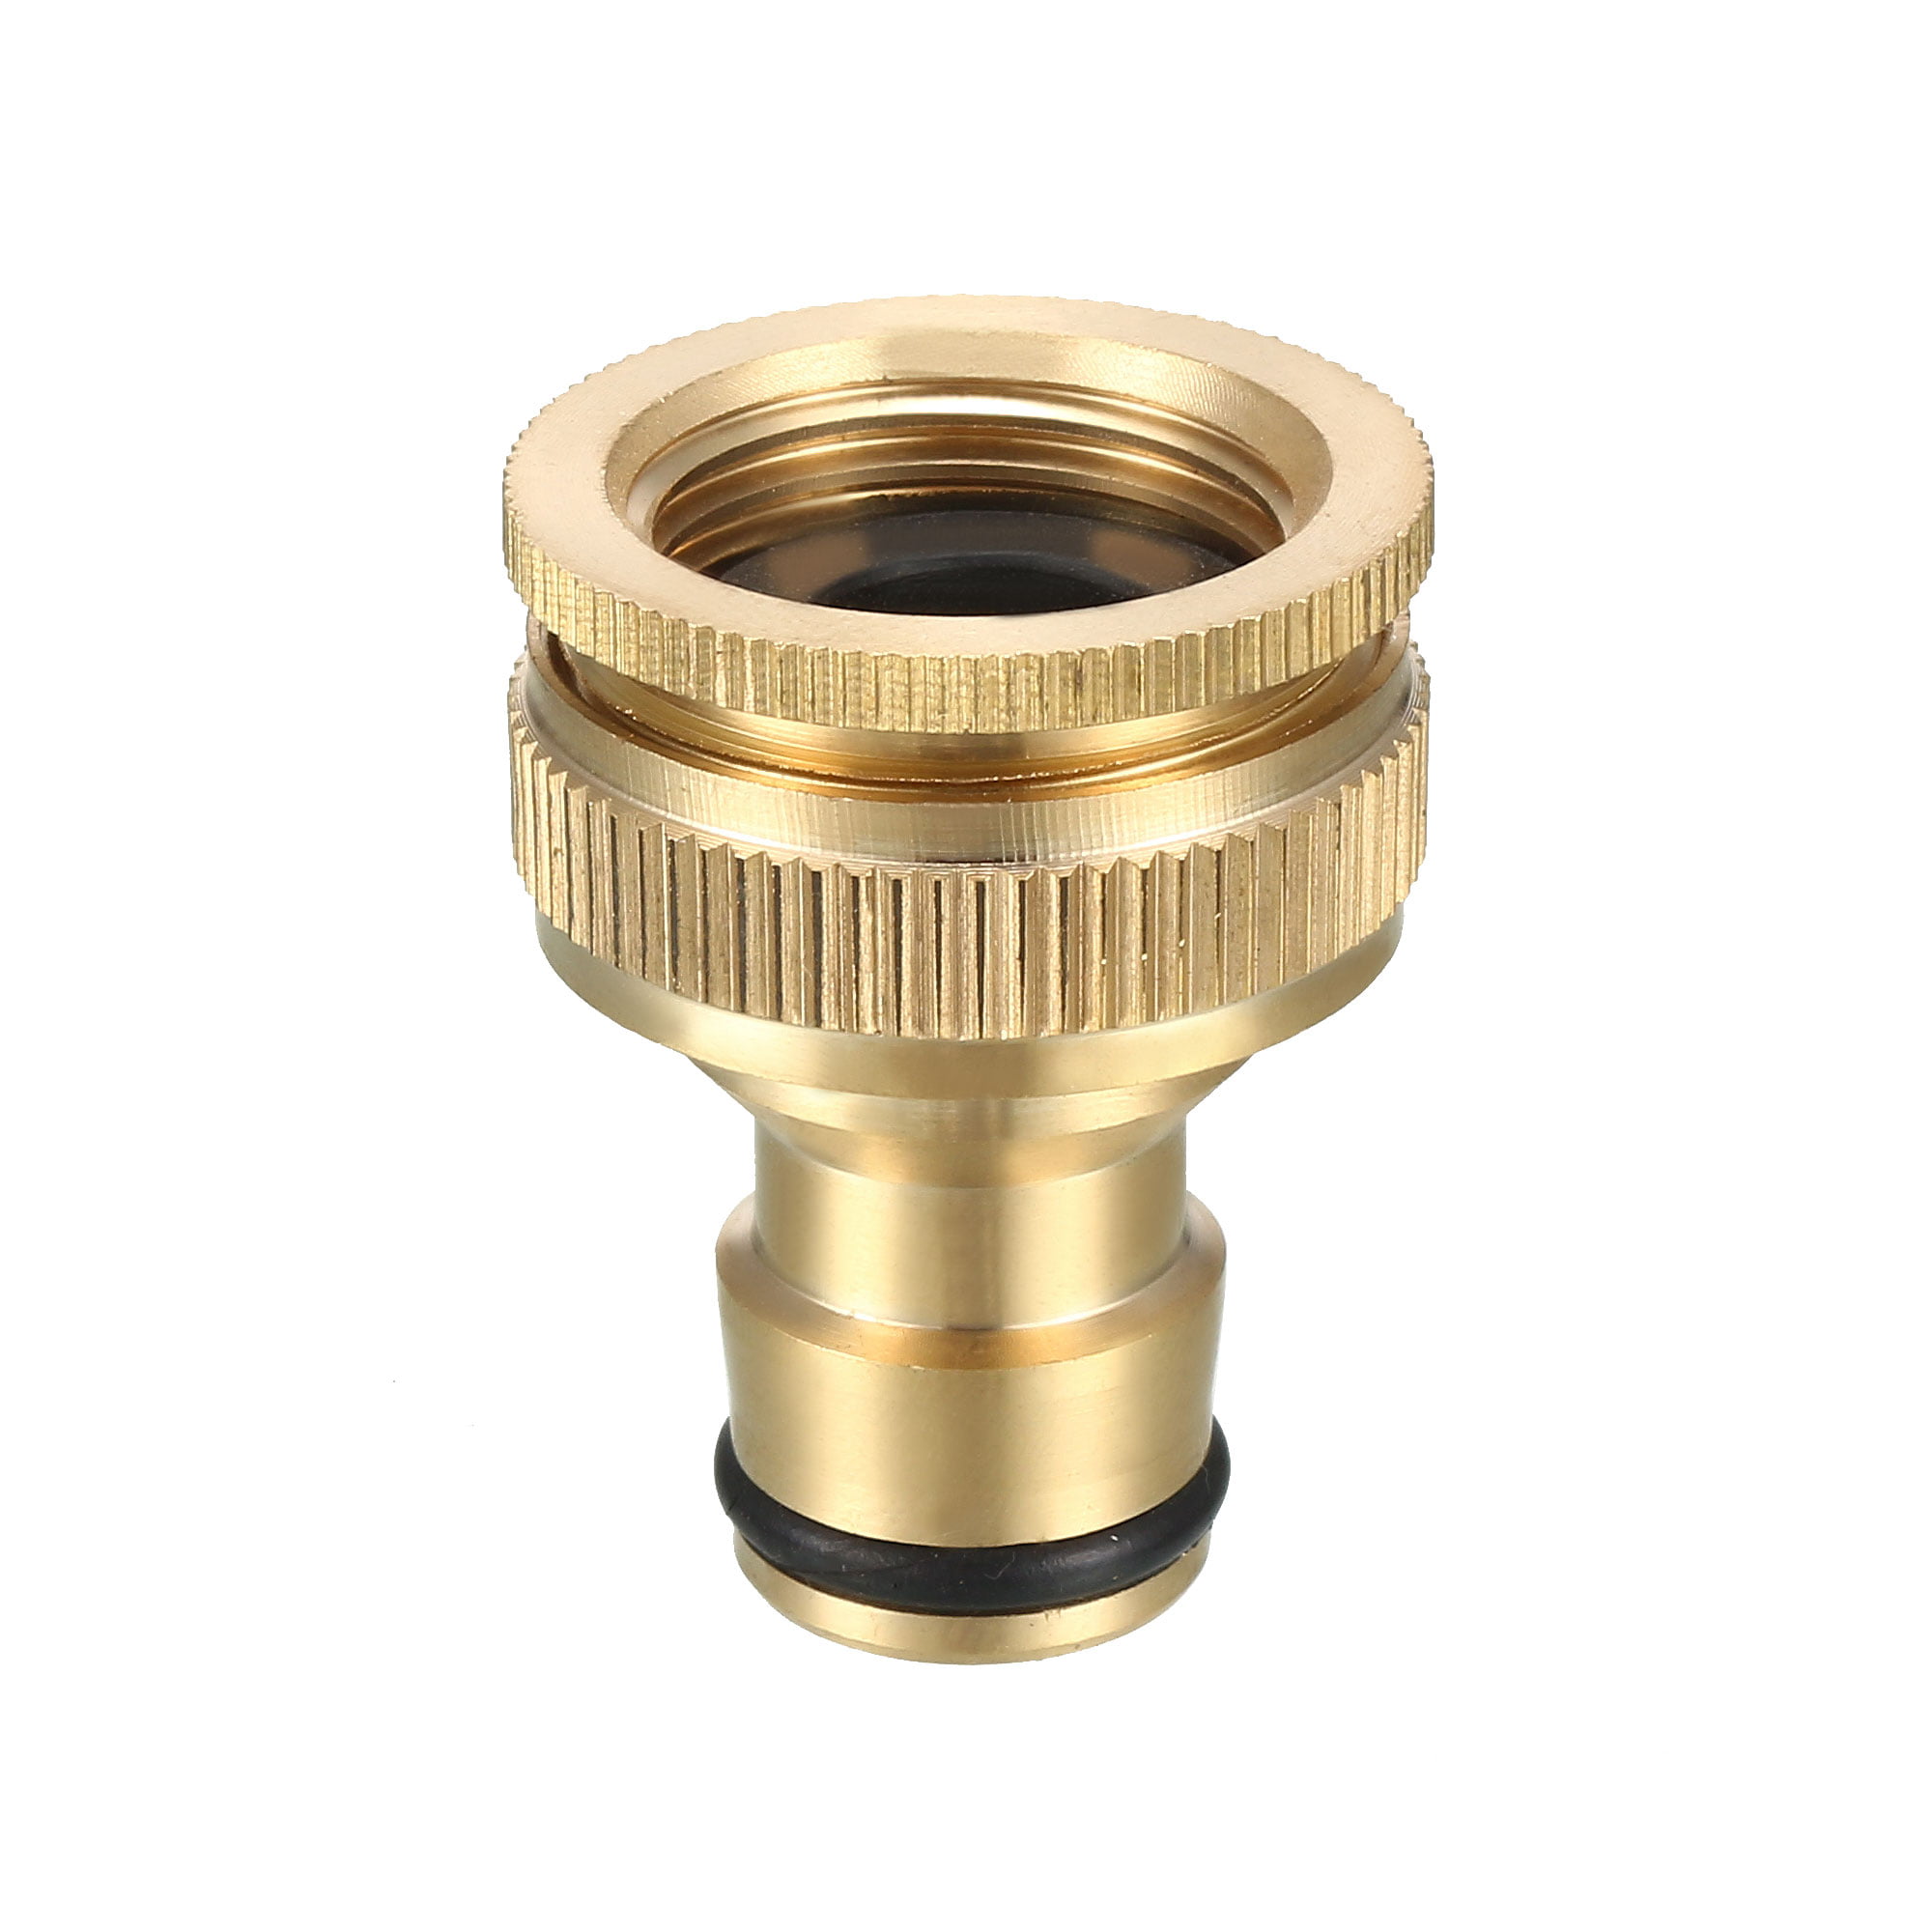 Plastic Garden Outdoor Hose Tap Connector 1/2 Inch and 3/4 Inch Size 2-in-1 L 